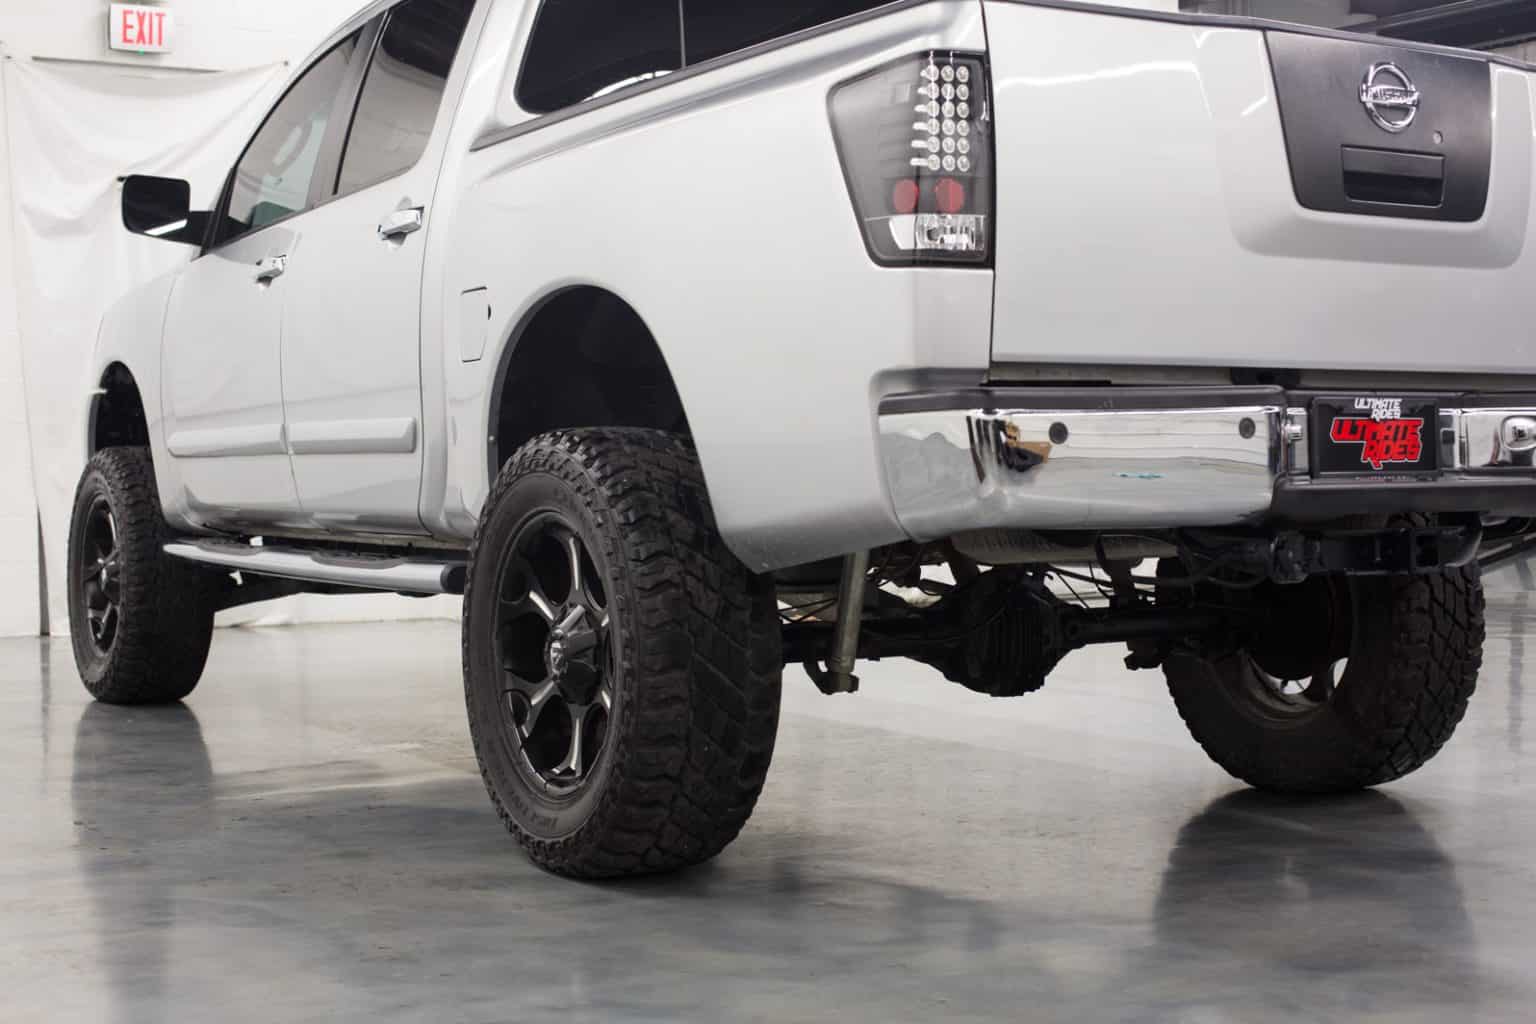 Lifted Trucks for Sale in Rhode Island